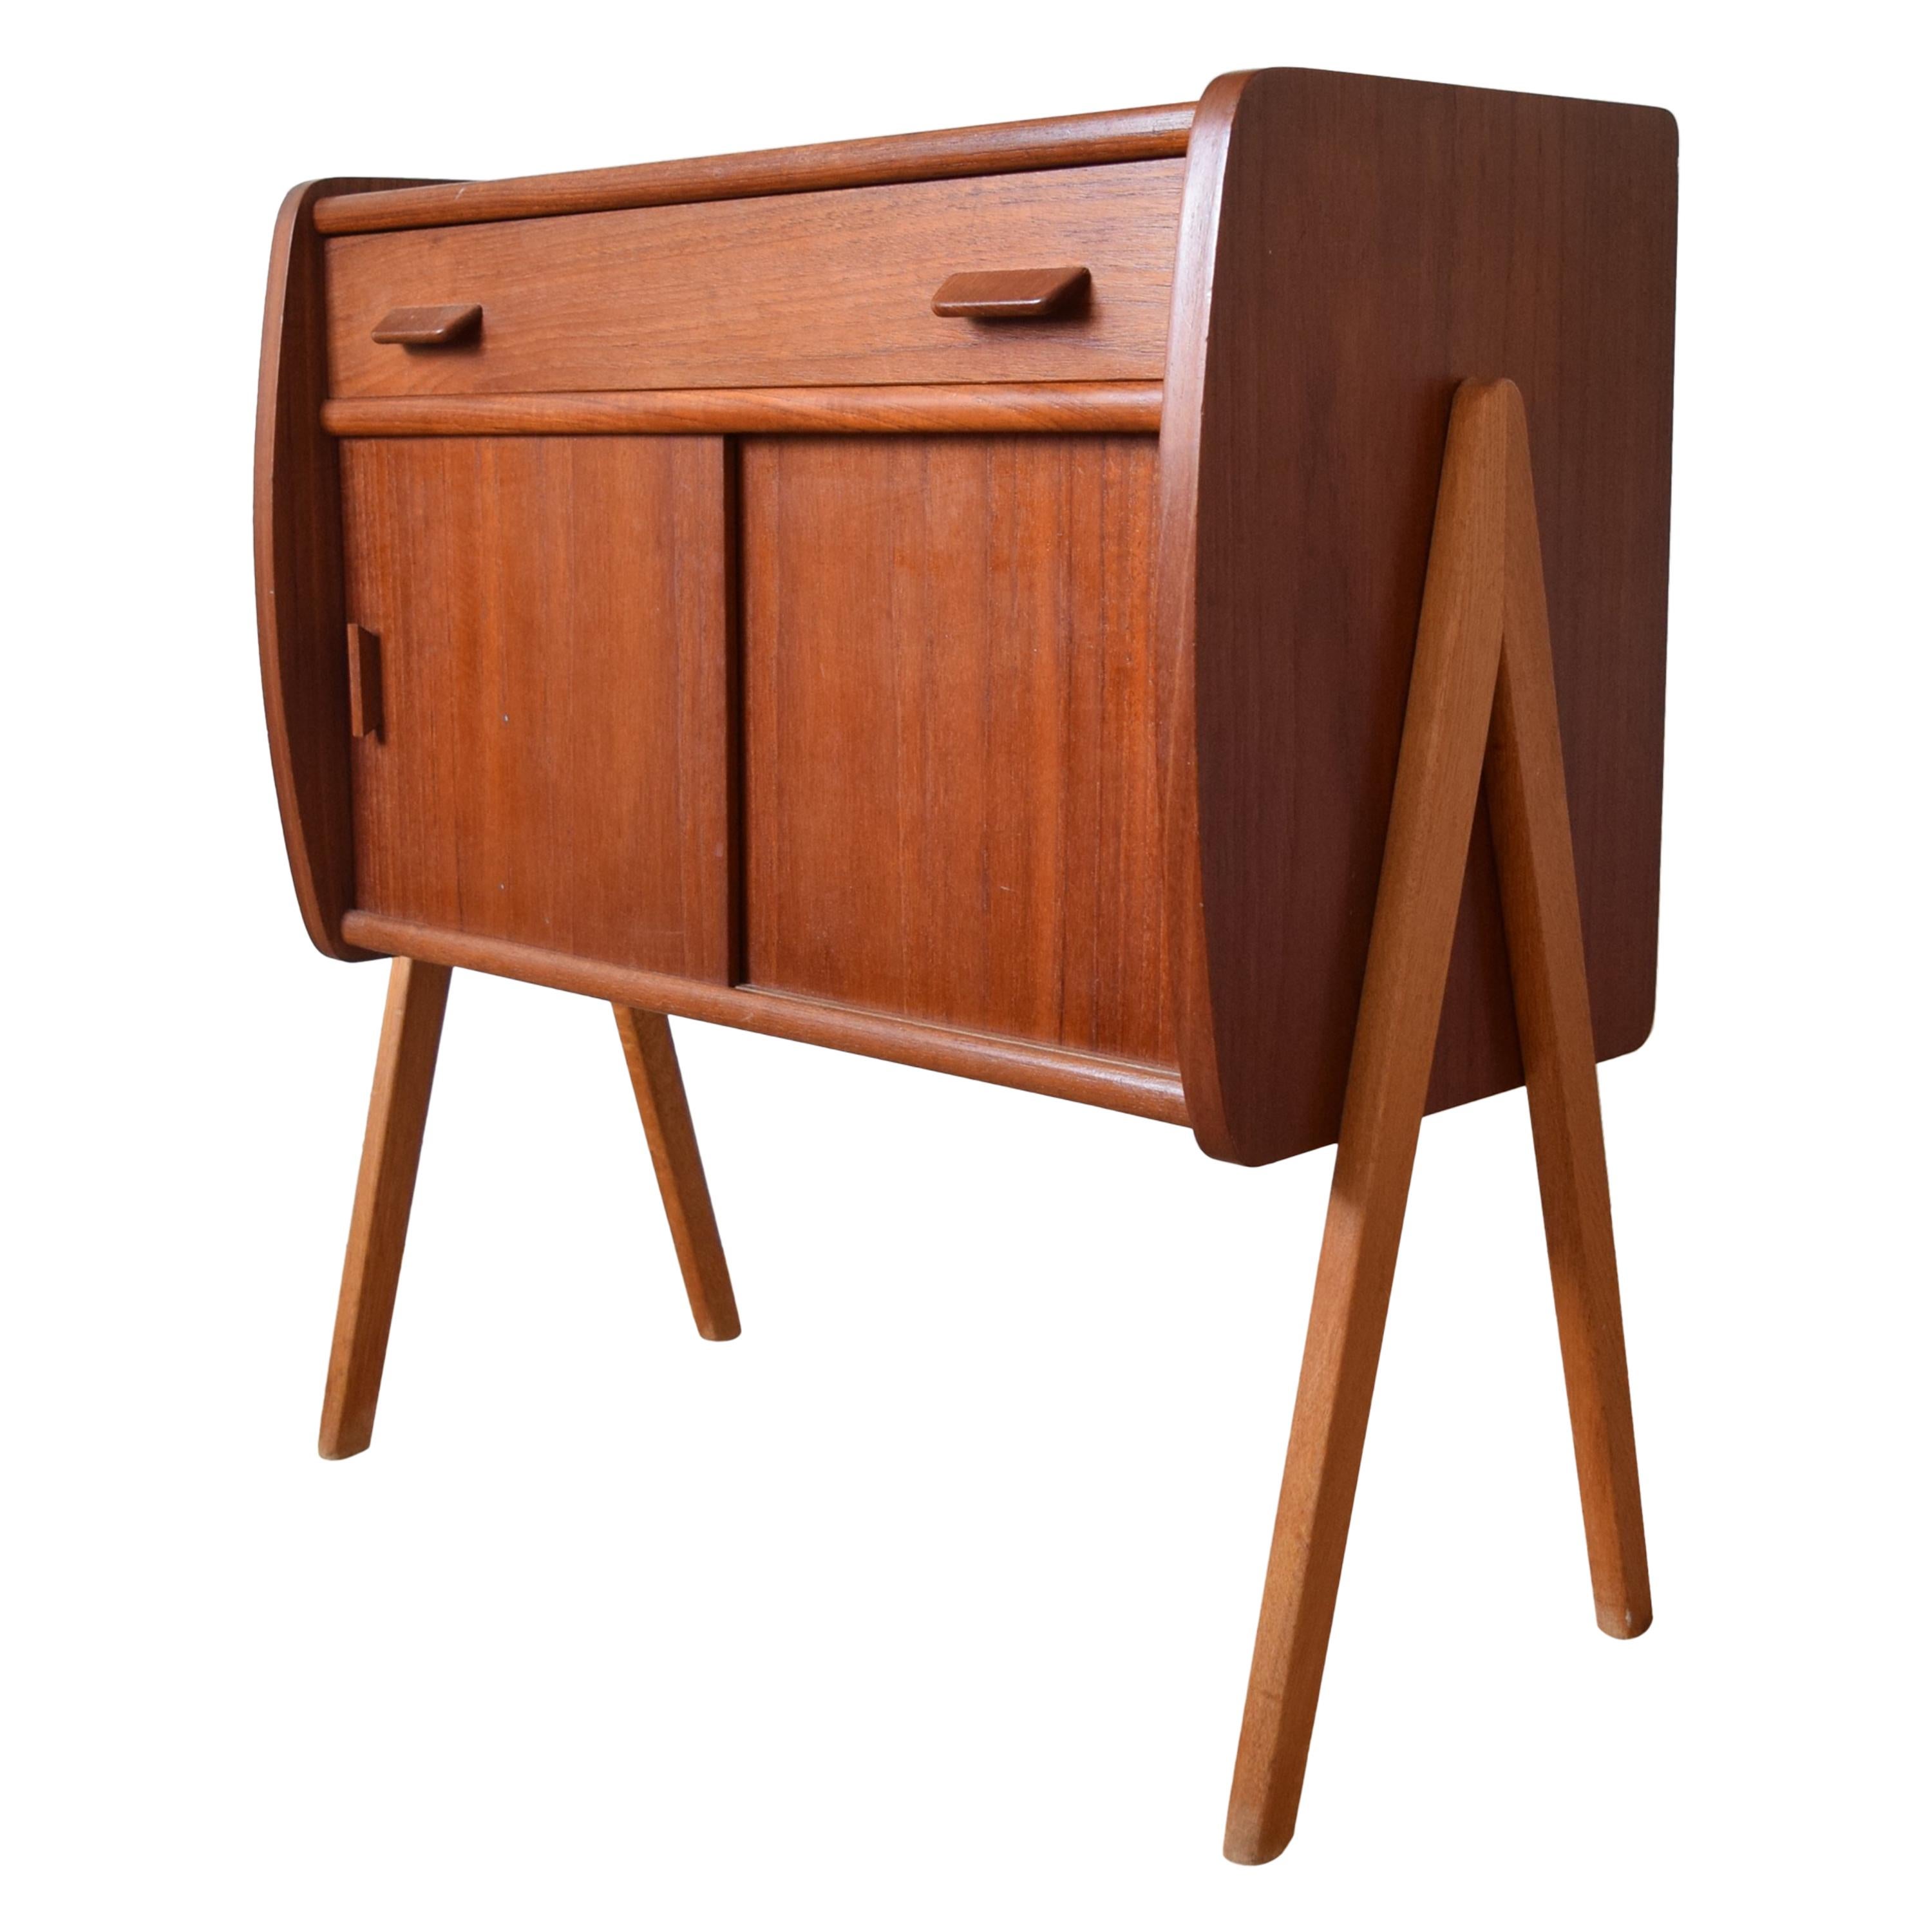 Danish Midcentury Teak Cabinet by Poul Volther